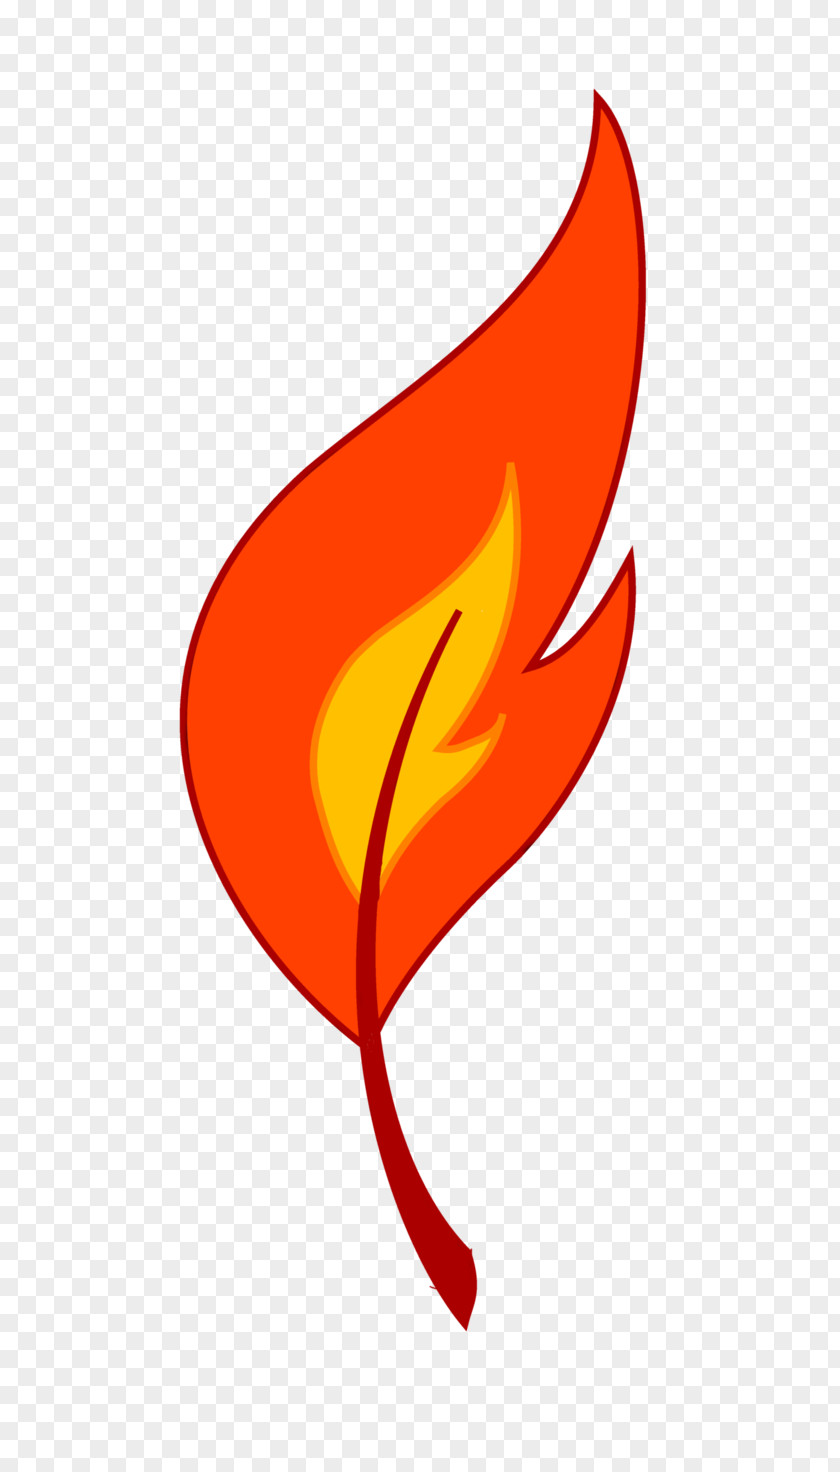 Feather Cutie Mark Crusaders Equestria Fire PNG